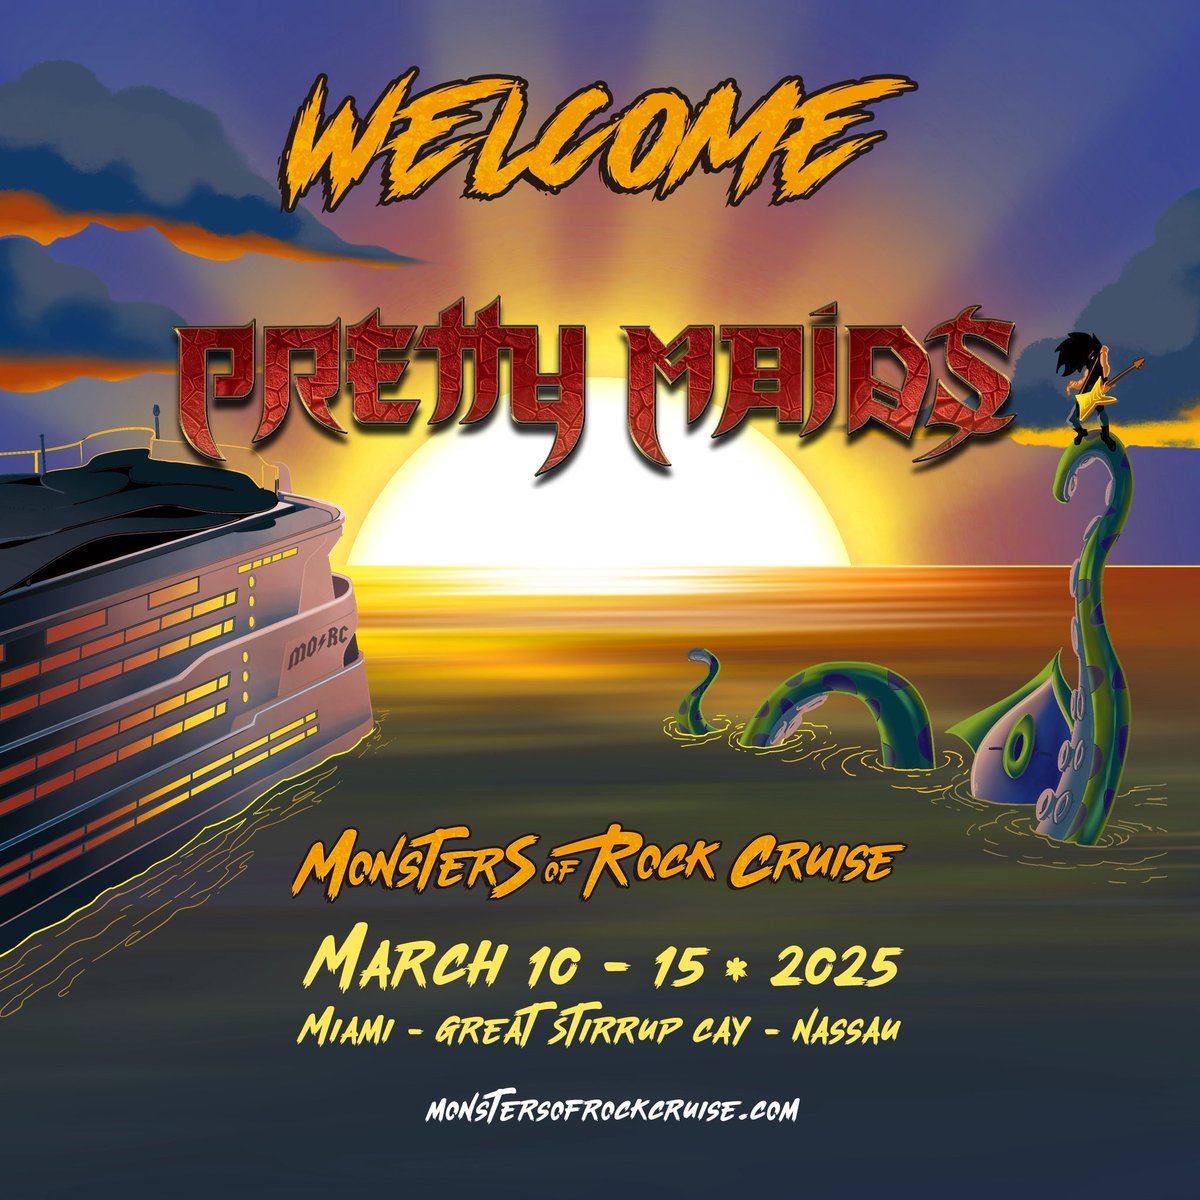 🔥 Stepping next… we have an old friend coming back to MO⚡️RC! Please welcome PRETTY MAIDS 🇩🇰 back for the 2025 Monsters Of Rock Cruise!🛳️🏴‍☠️ #morc2025 #prettymaids #monstersofrockcruise